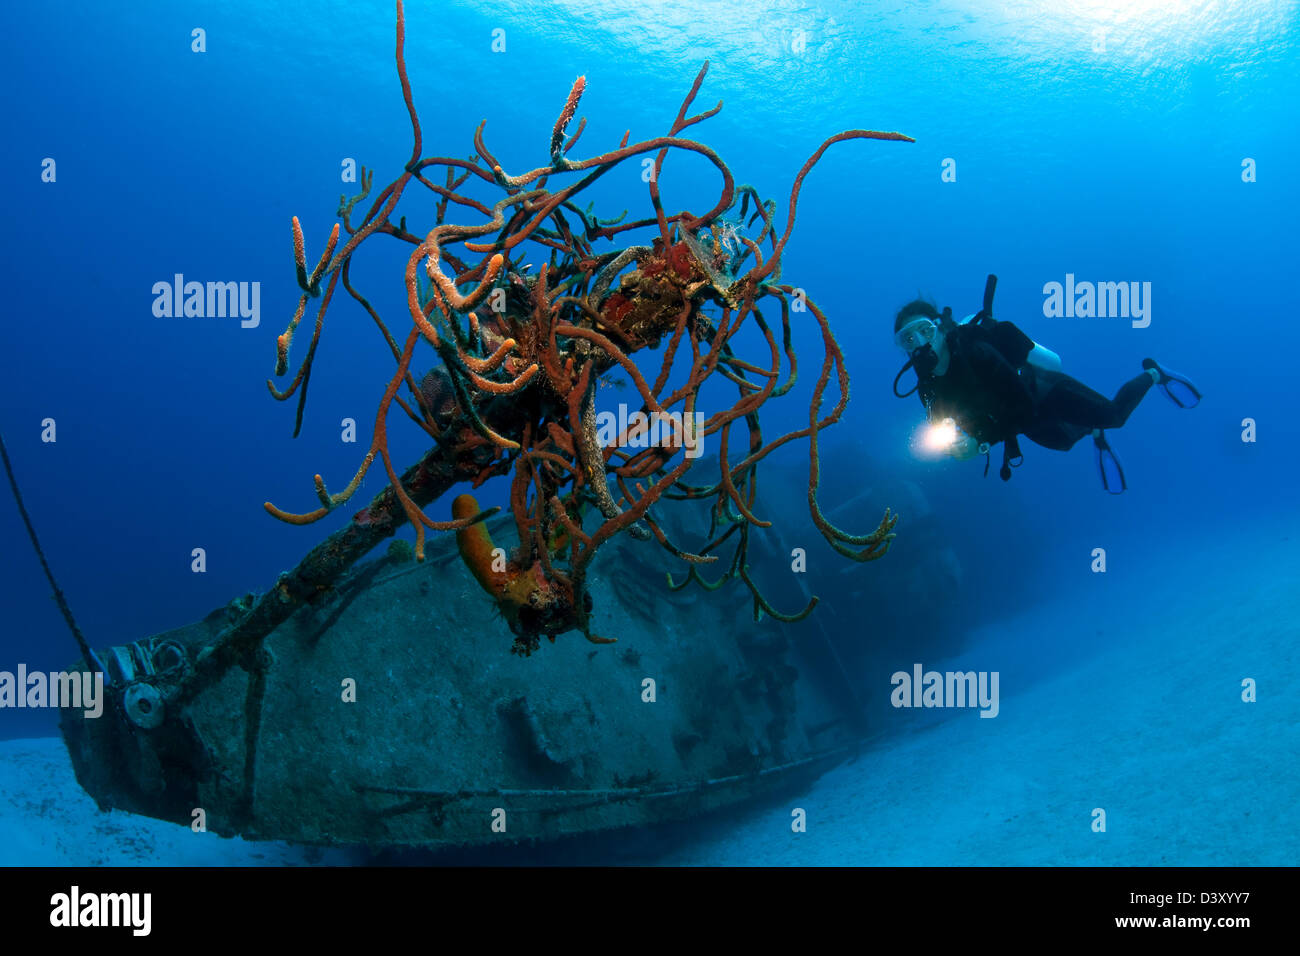 Wreckdiving the Russian Destroyer M.V. Captain Keith Tibbets. Stock Photo